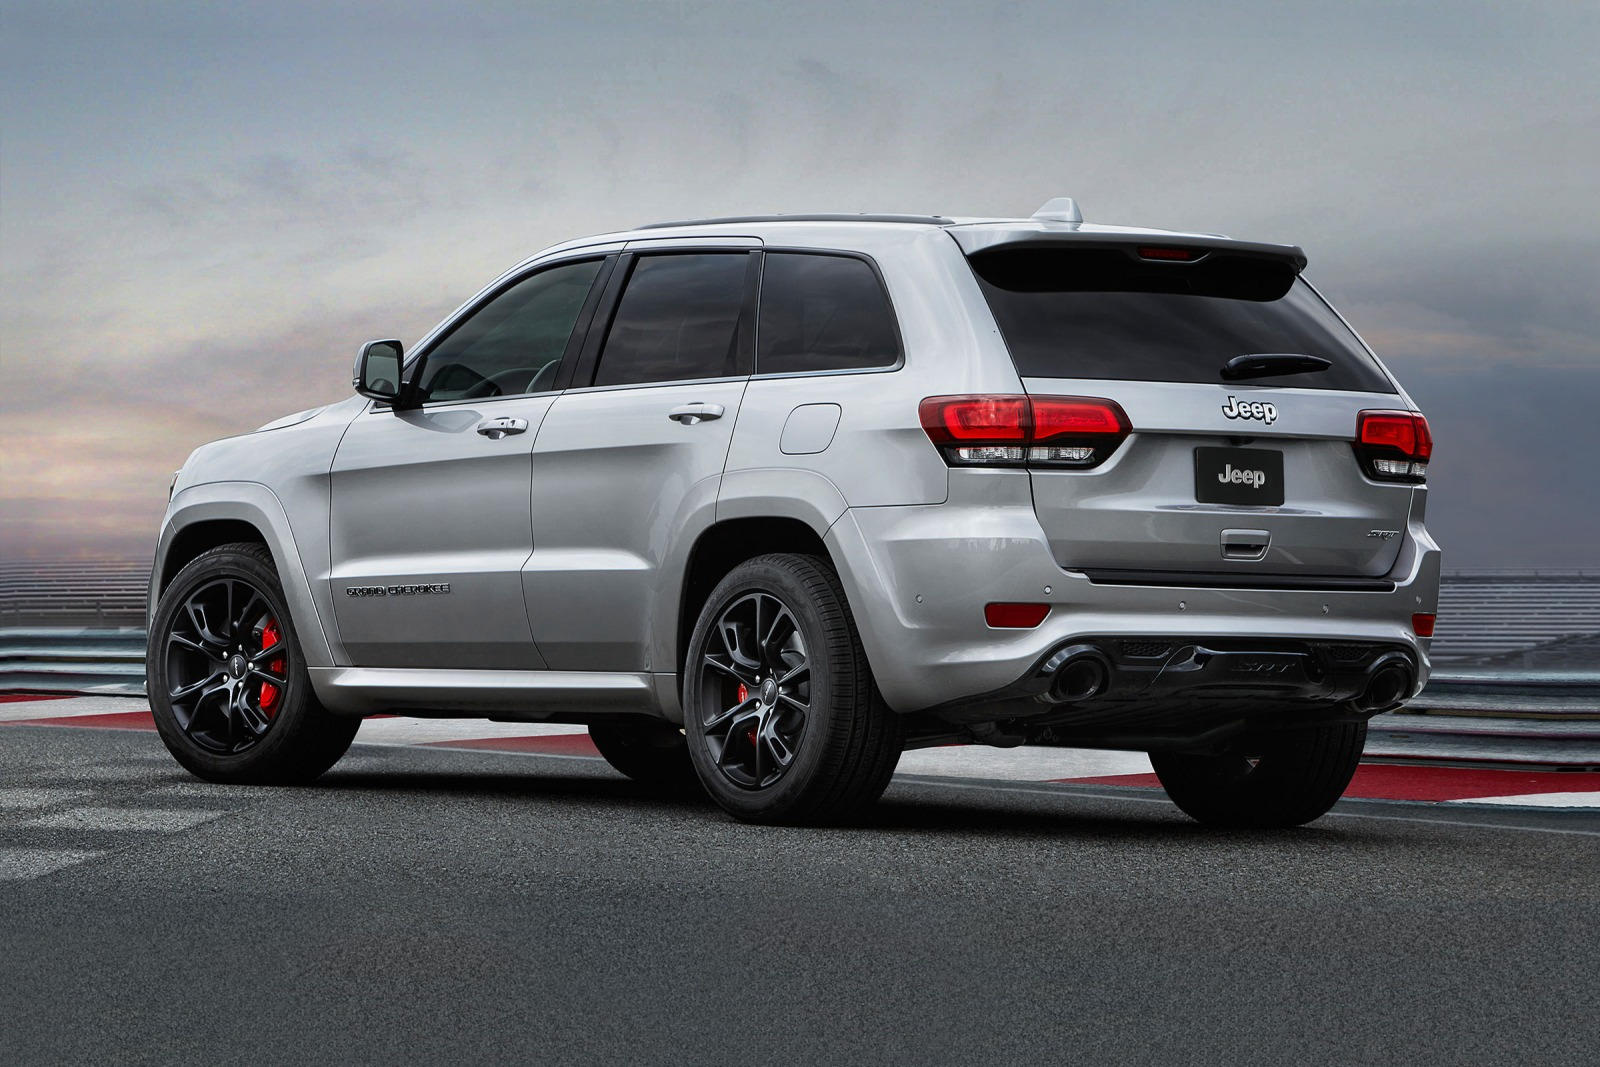 2019 Jeep Grand Cherokee SRT Review, Trims, Specs, Price, New Interior Features, Exterior